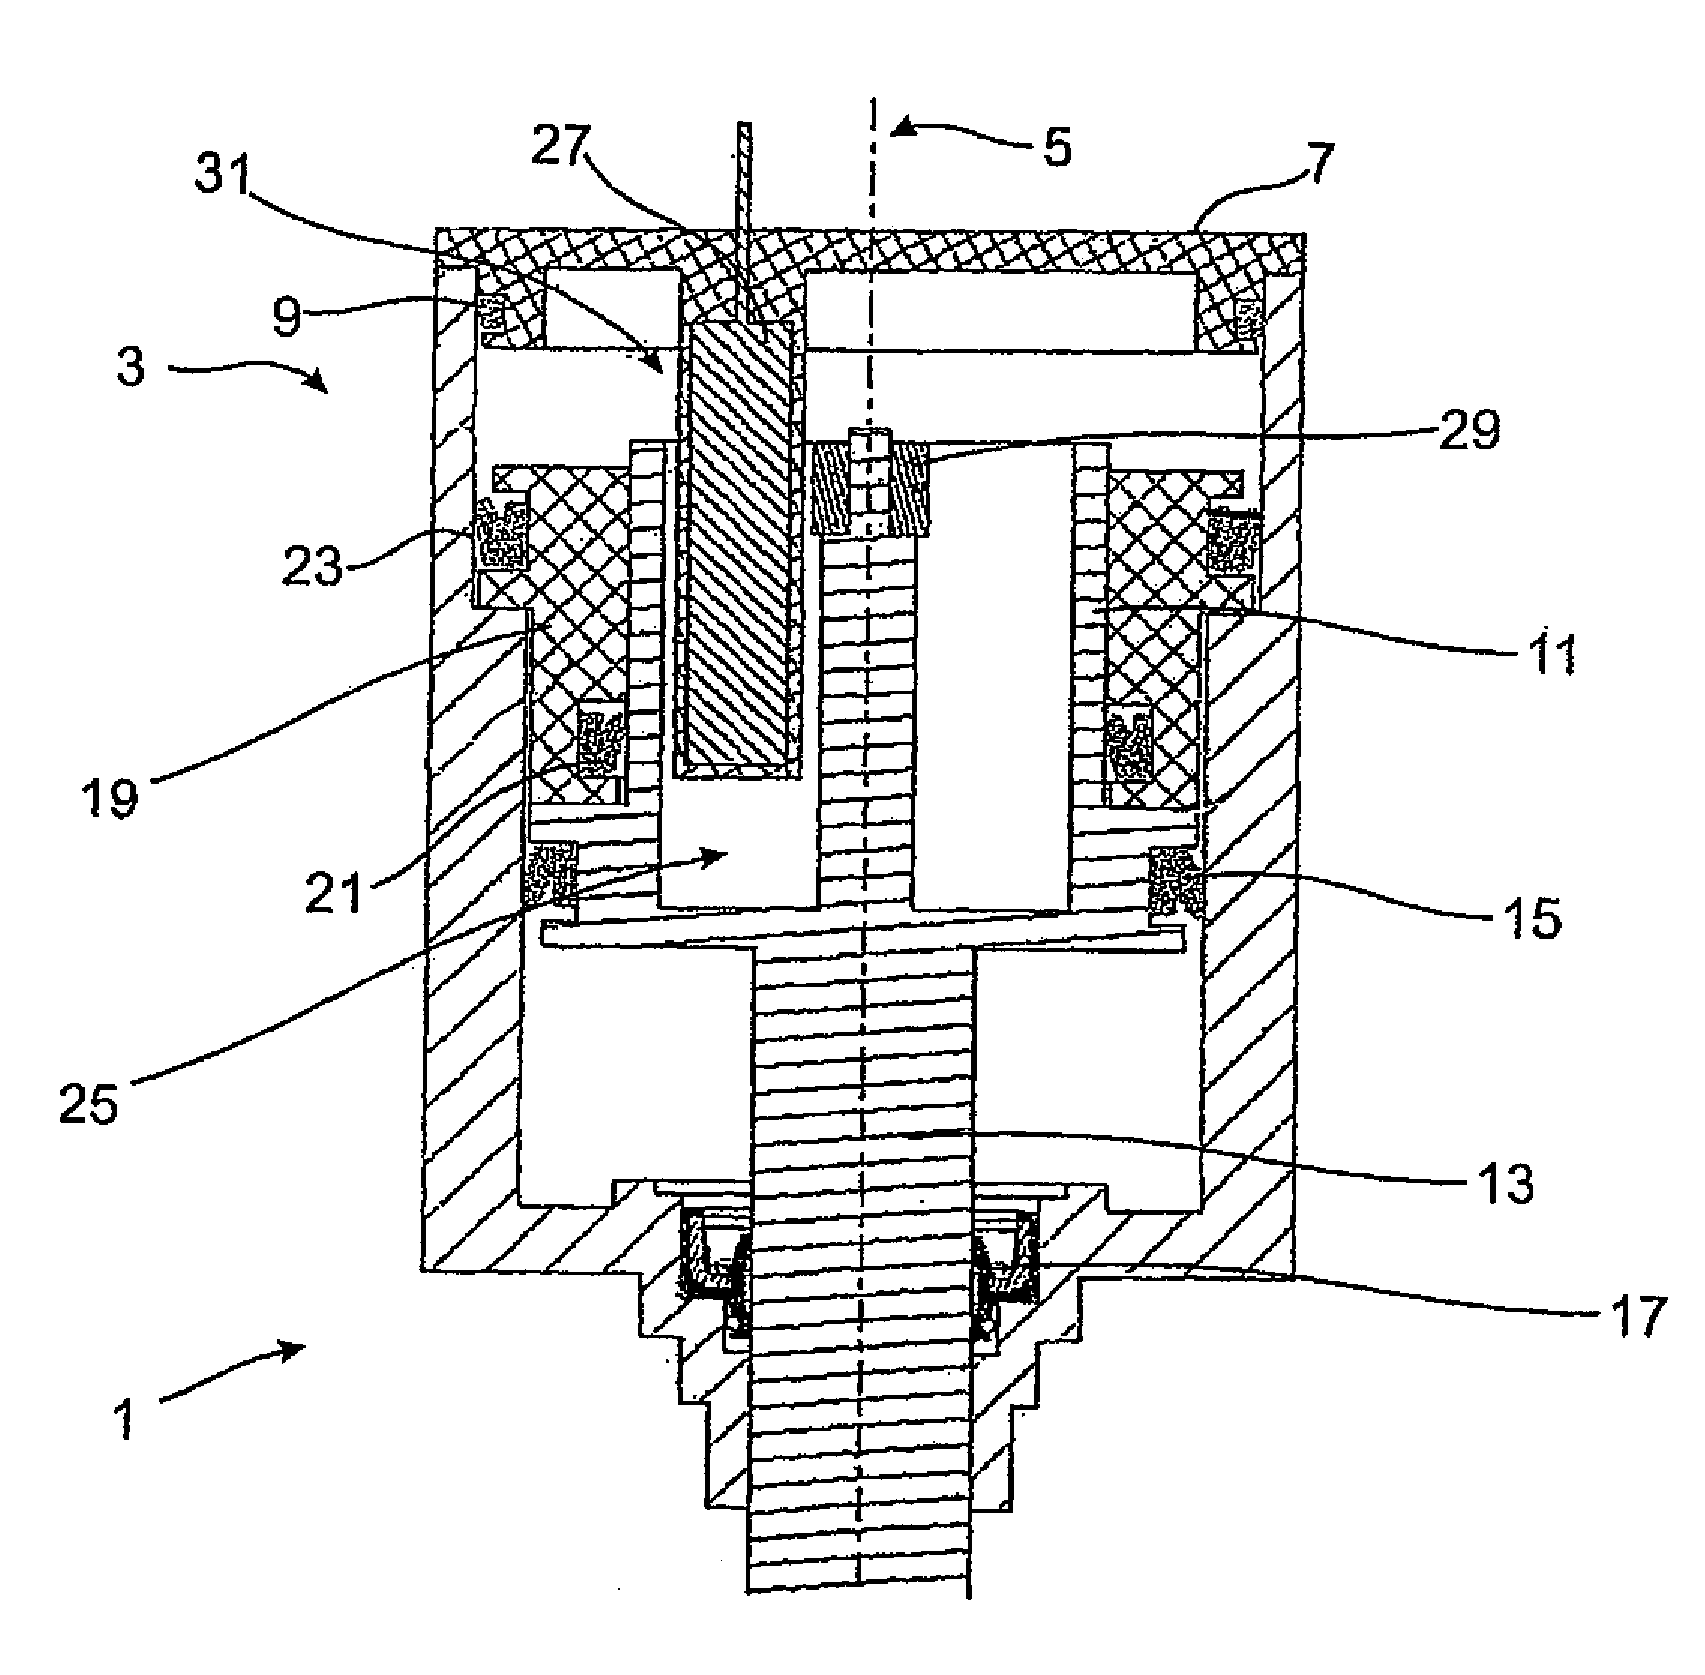 Piston-cylinder assembly having integrated measuring device